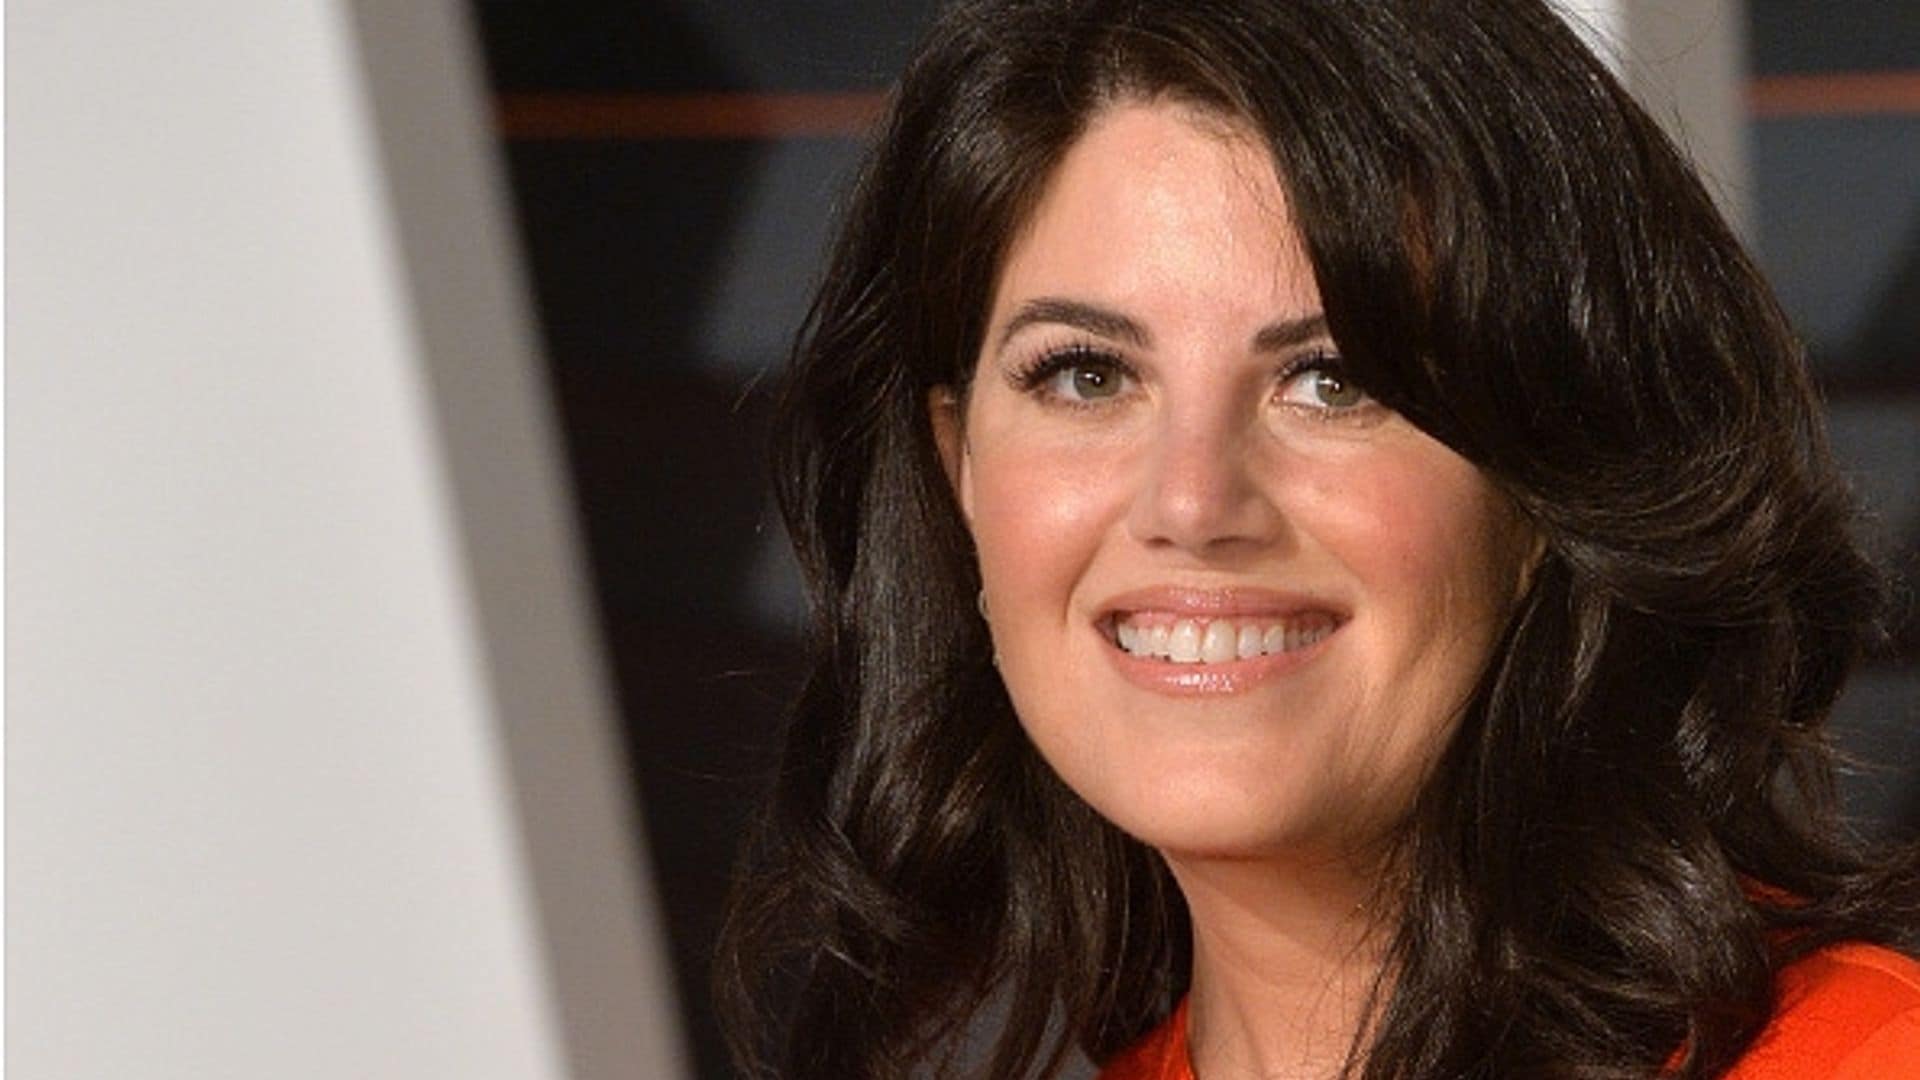 Monica Lewinsky: 'Time to stop tip-toeing around my past' with Bill Clinton